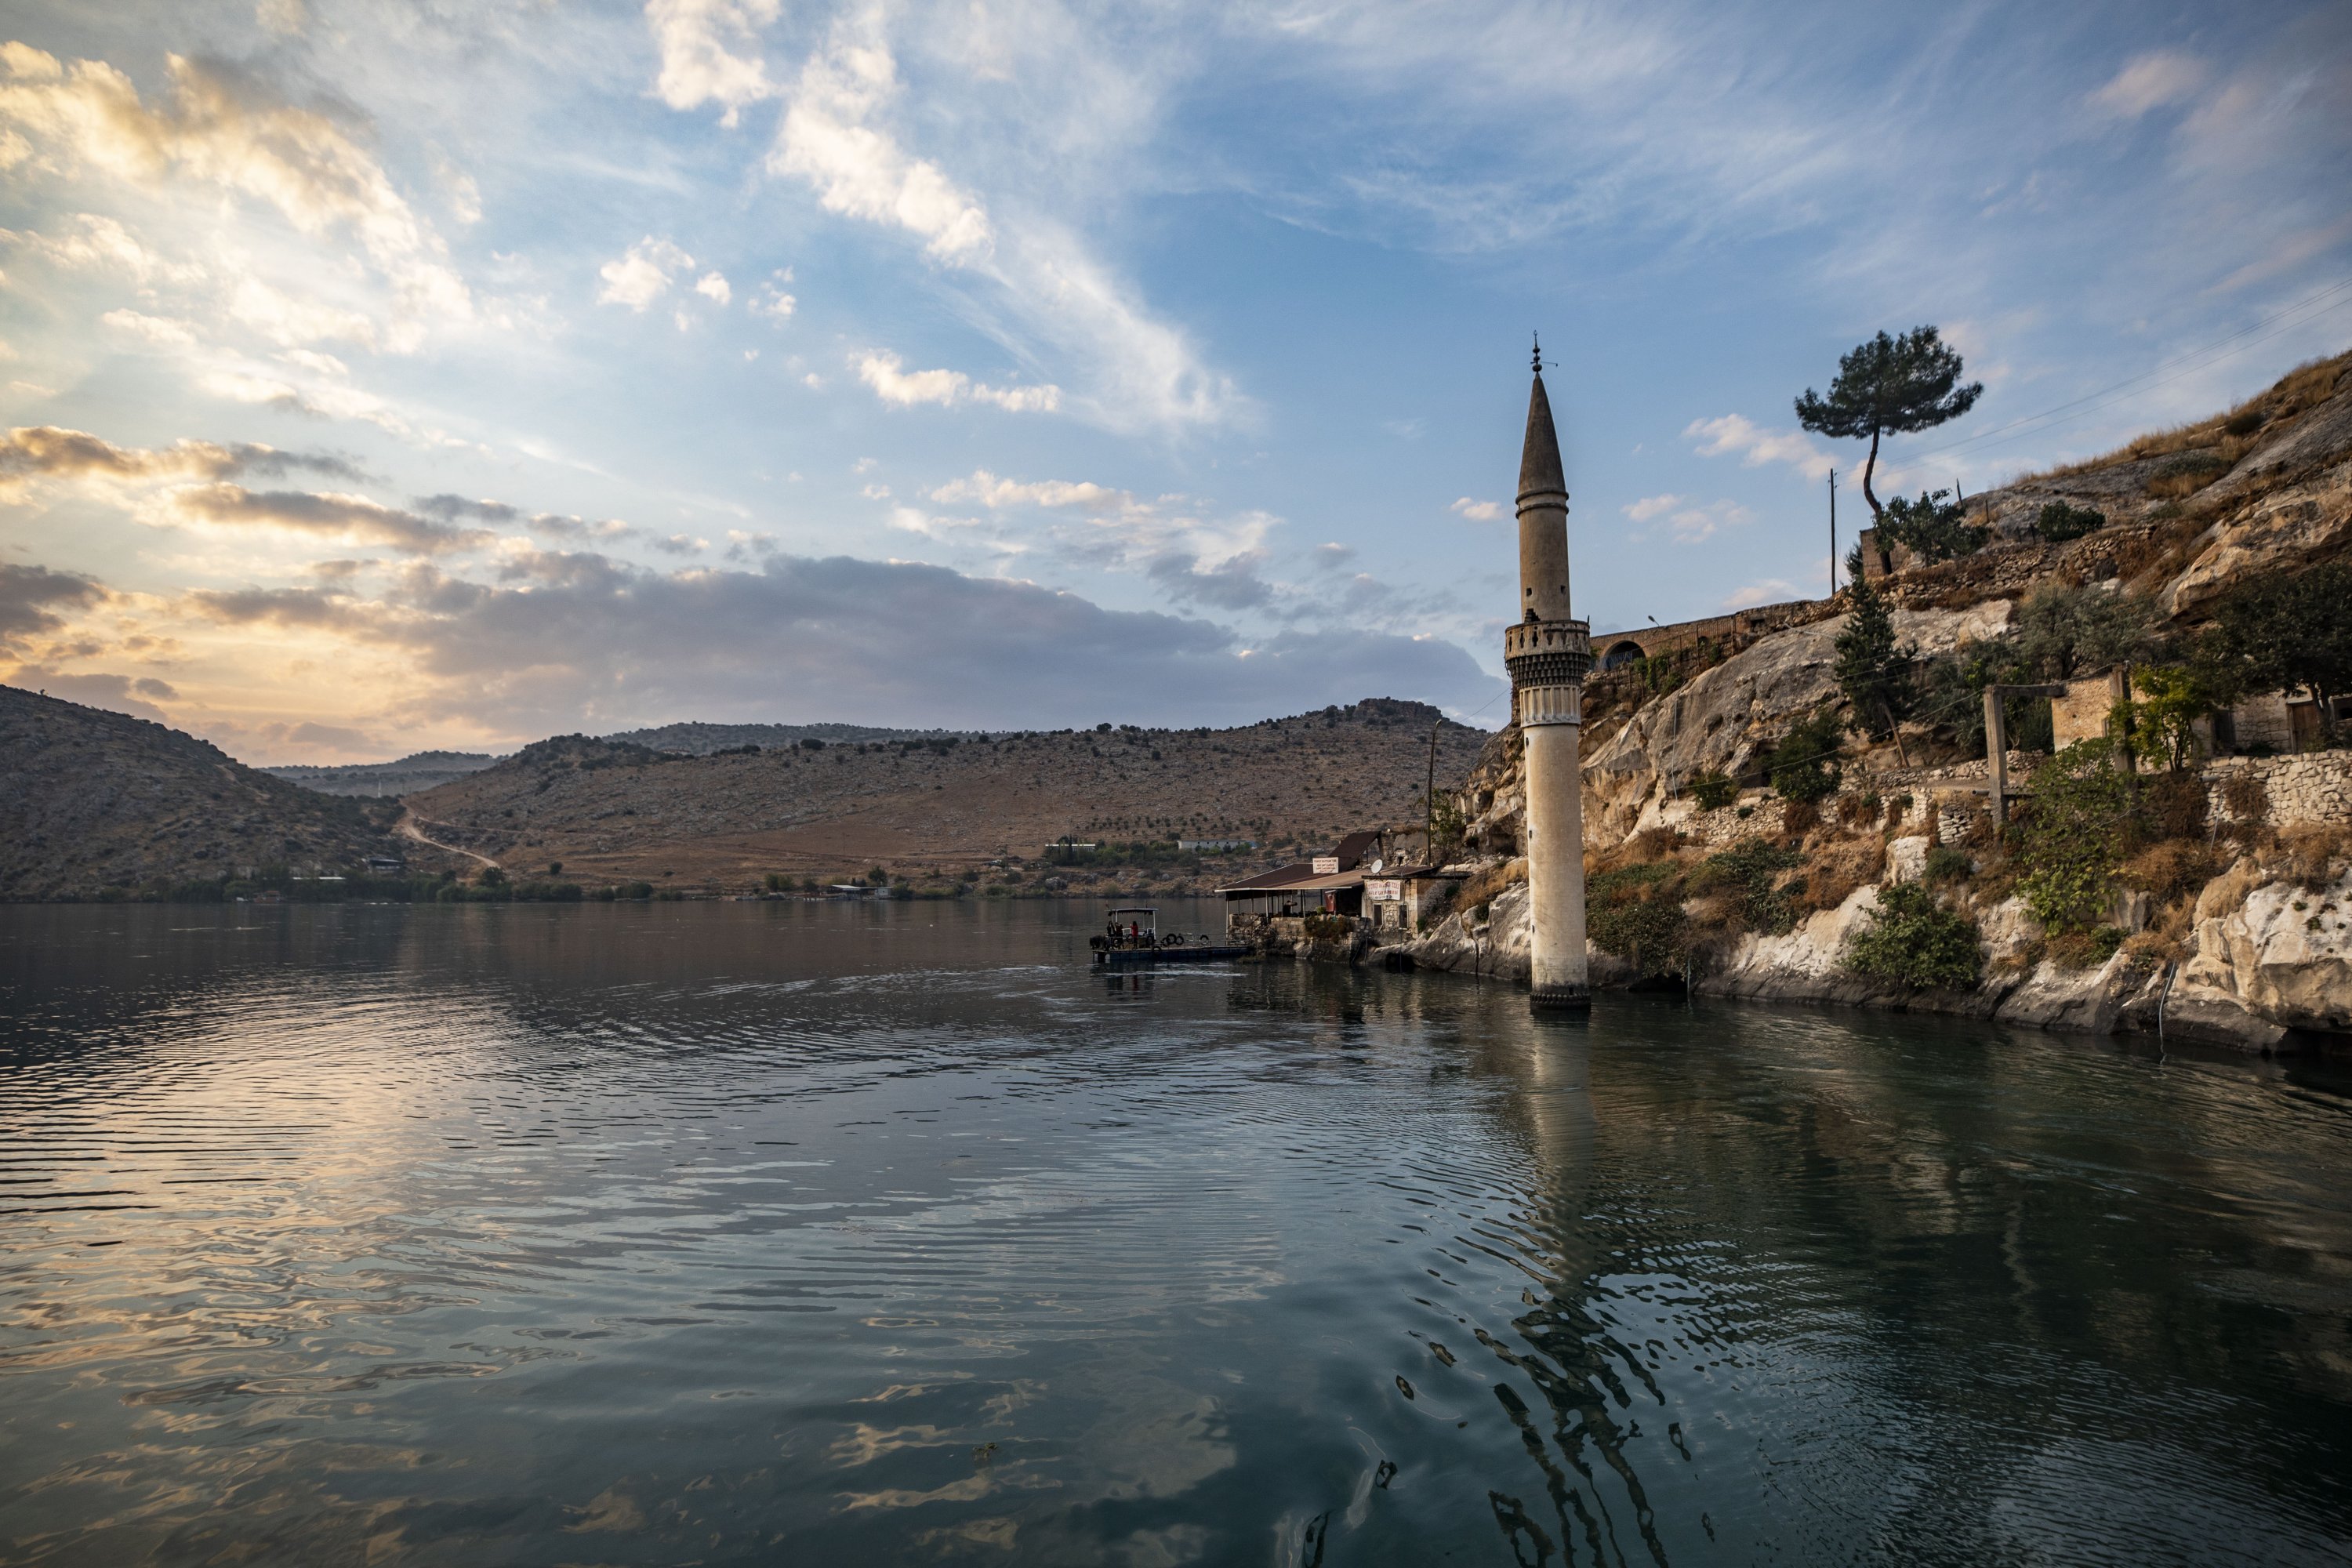 The historic town of Halfeti lies on the eastern bank of the Euphrates River and is aptly called the “sunken city” in Turkish because it is partially submerged underwater. (AA Photo)